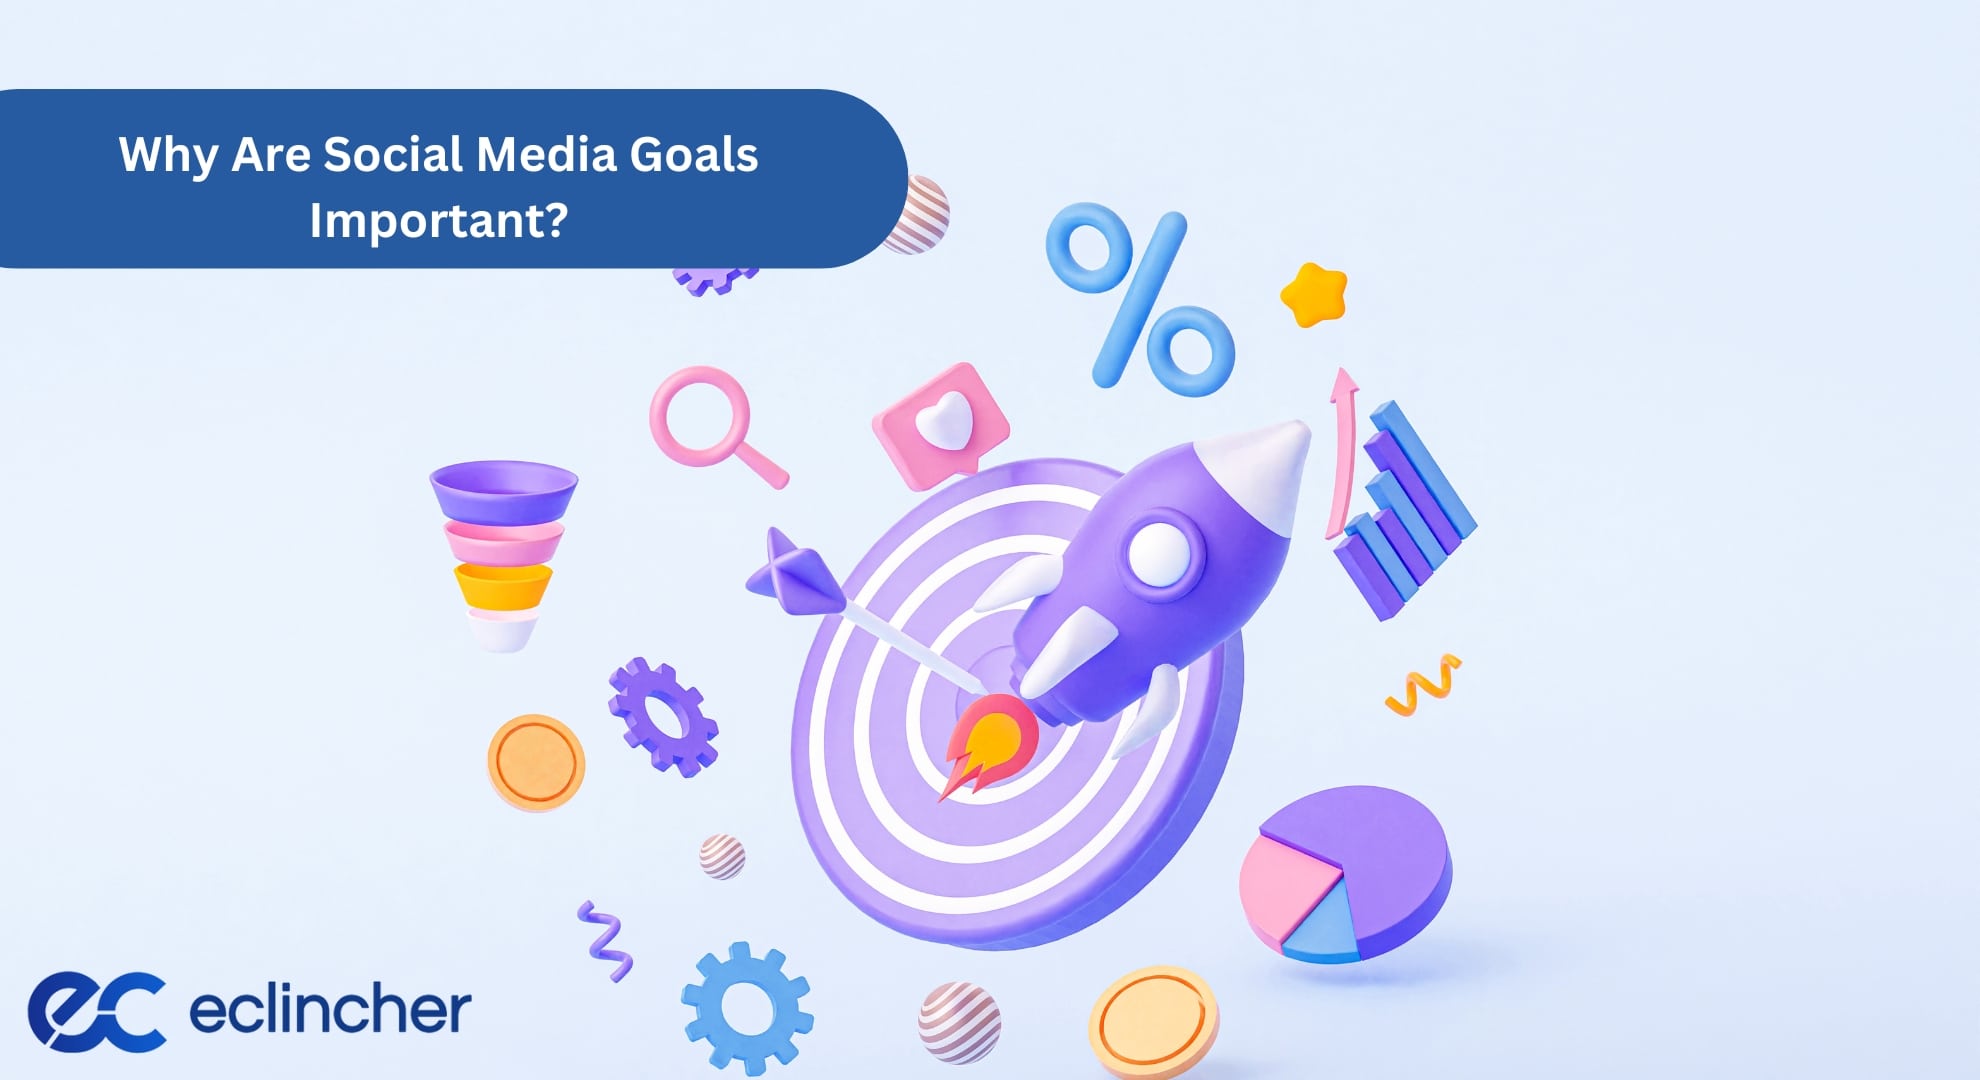 Why Are Social Media Goals Important?